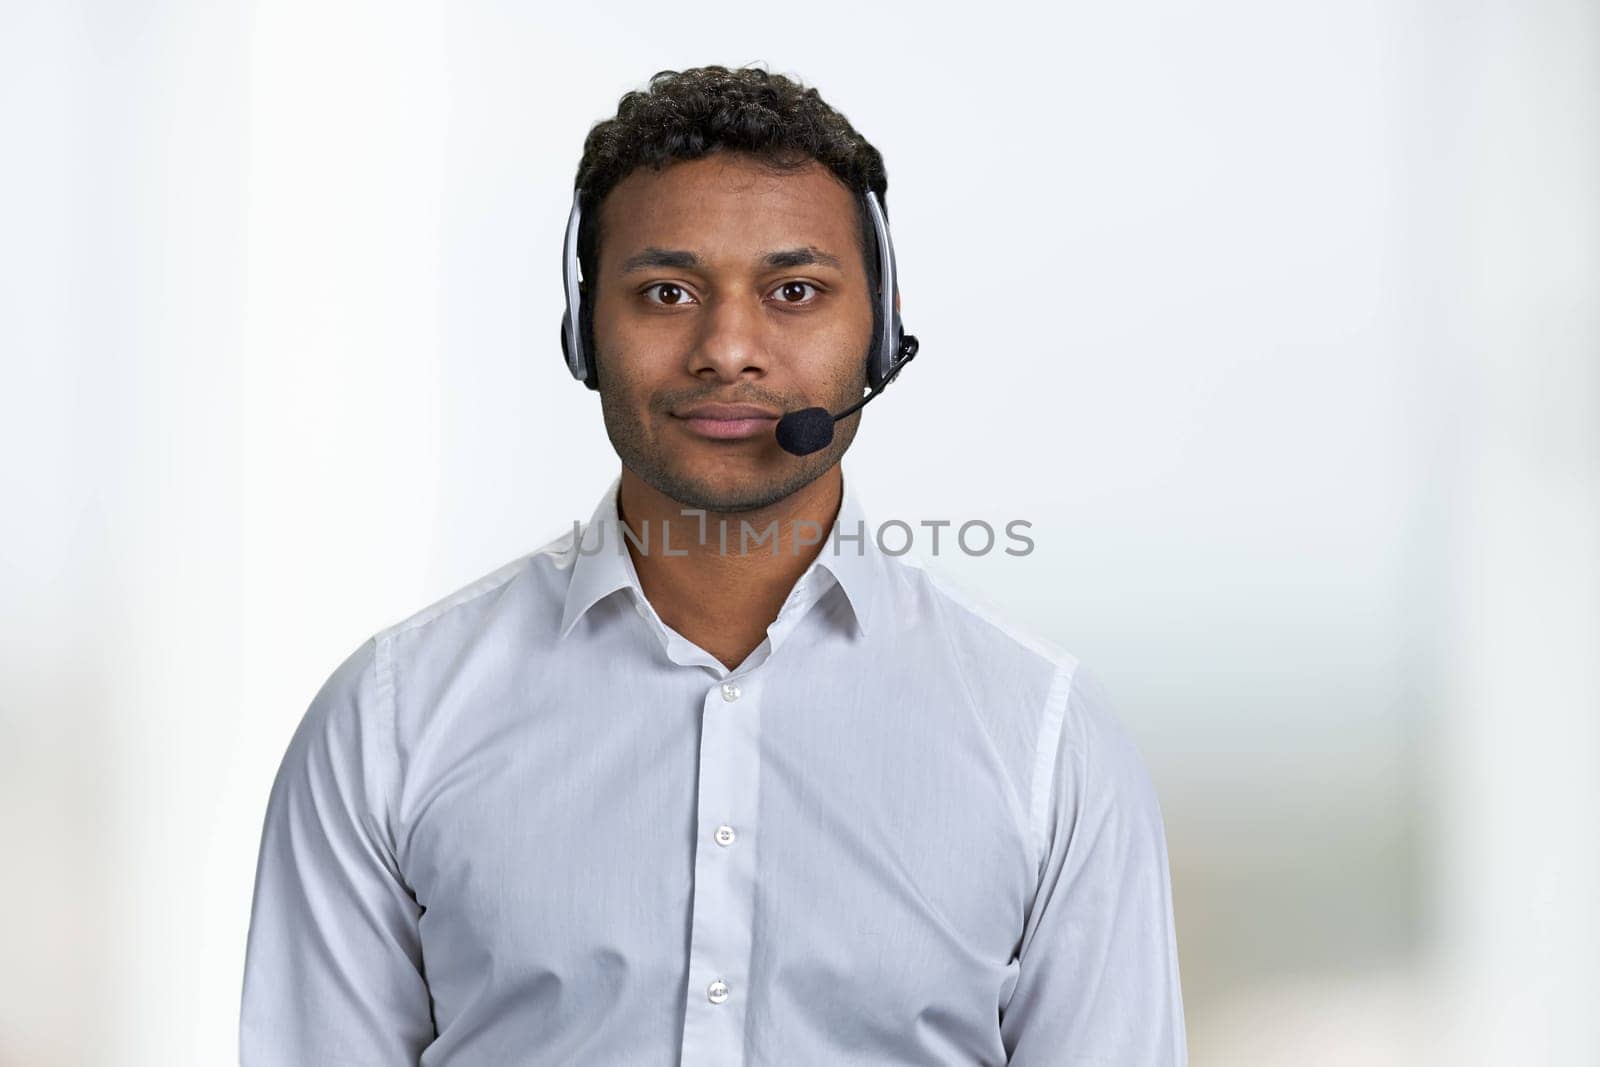 Handsome consultant of call center in headset looking at camera. Portrait of call center agent on blurred background.